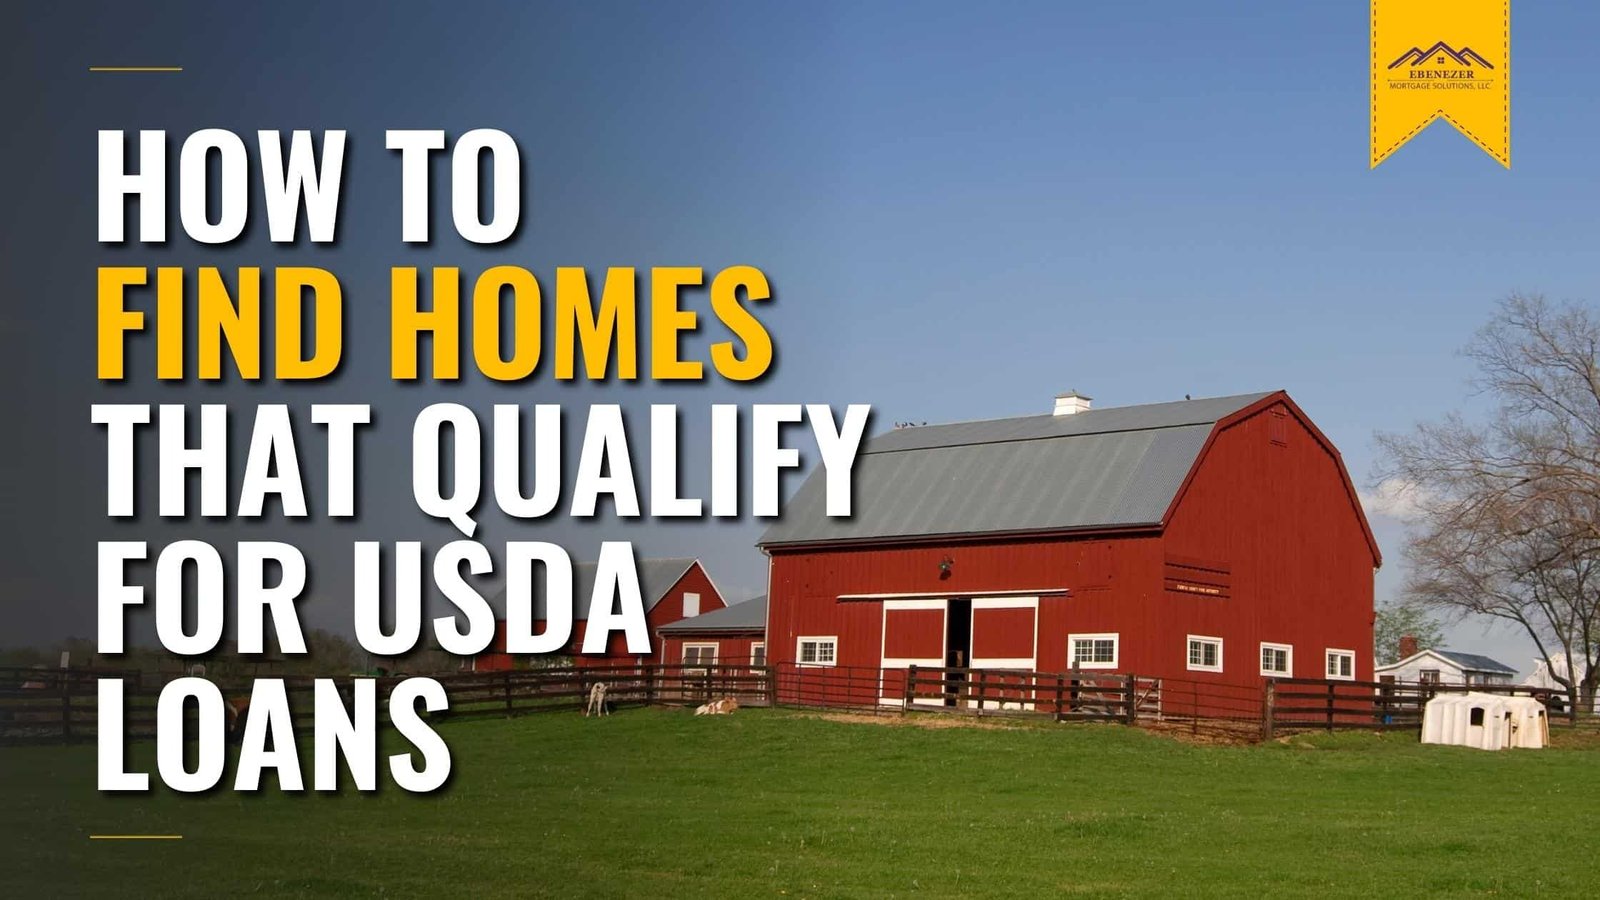 USDA Loans for Properties in USDA-Eligible Rural Areas